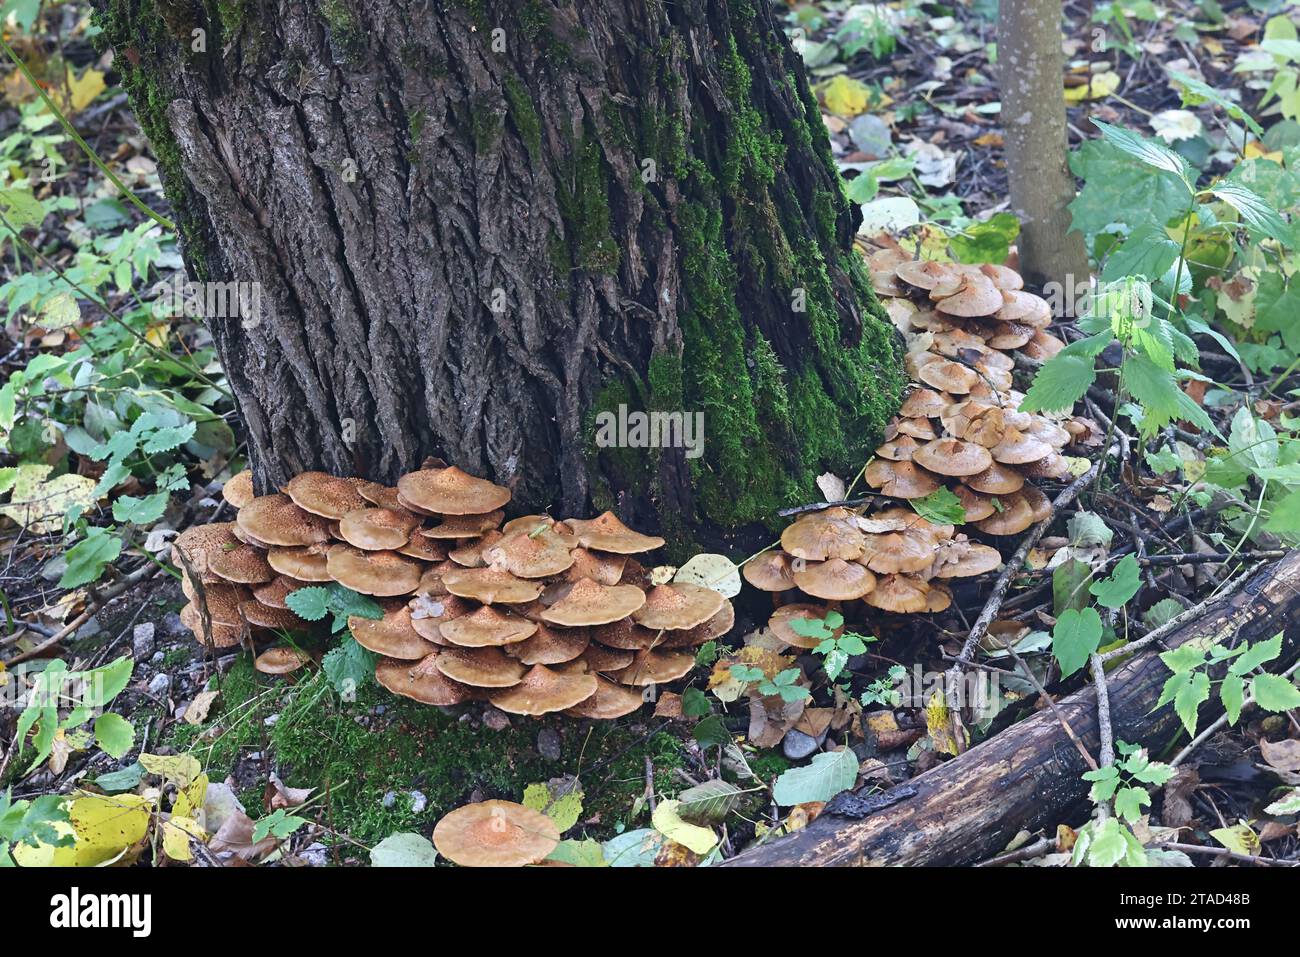 Shaggy scalycap, Pholiota squarrosa, known also as shaggy Pholiota, or scaly Pholiota, wild mushroom from Finland Stock Photo